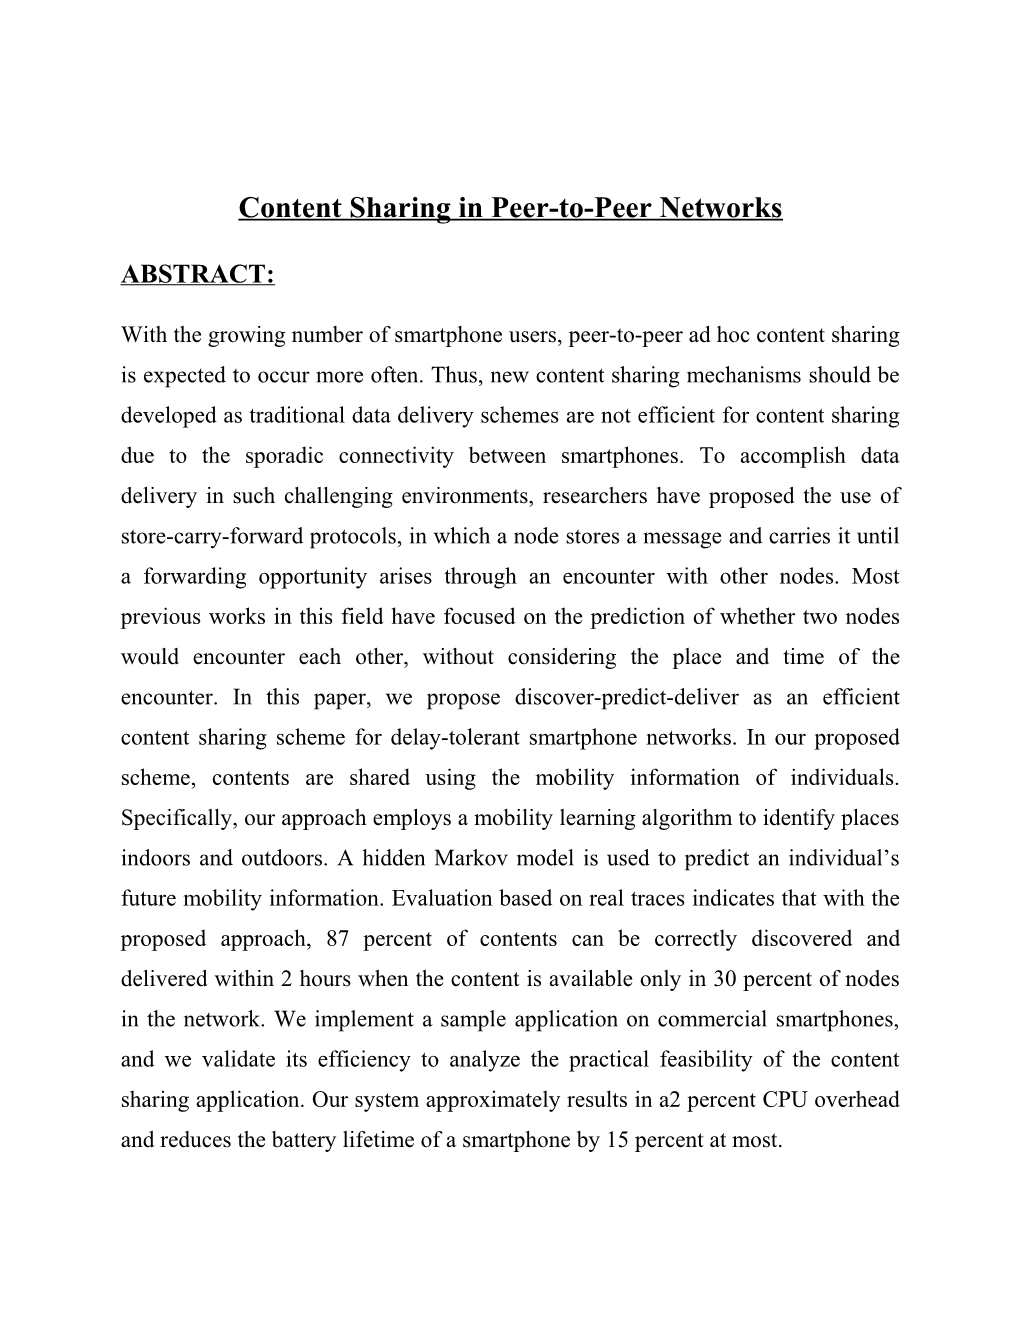 Content Sharing in Peer-To-Peer Networks